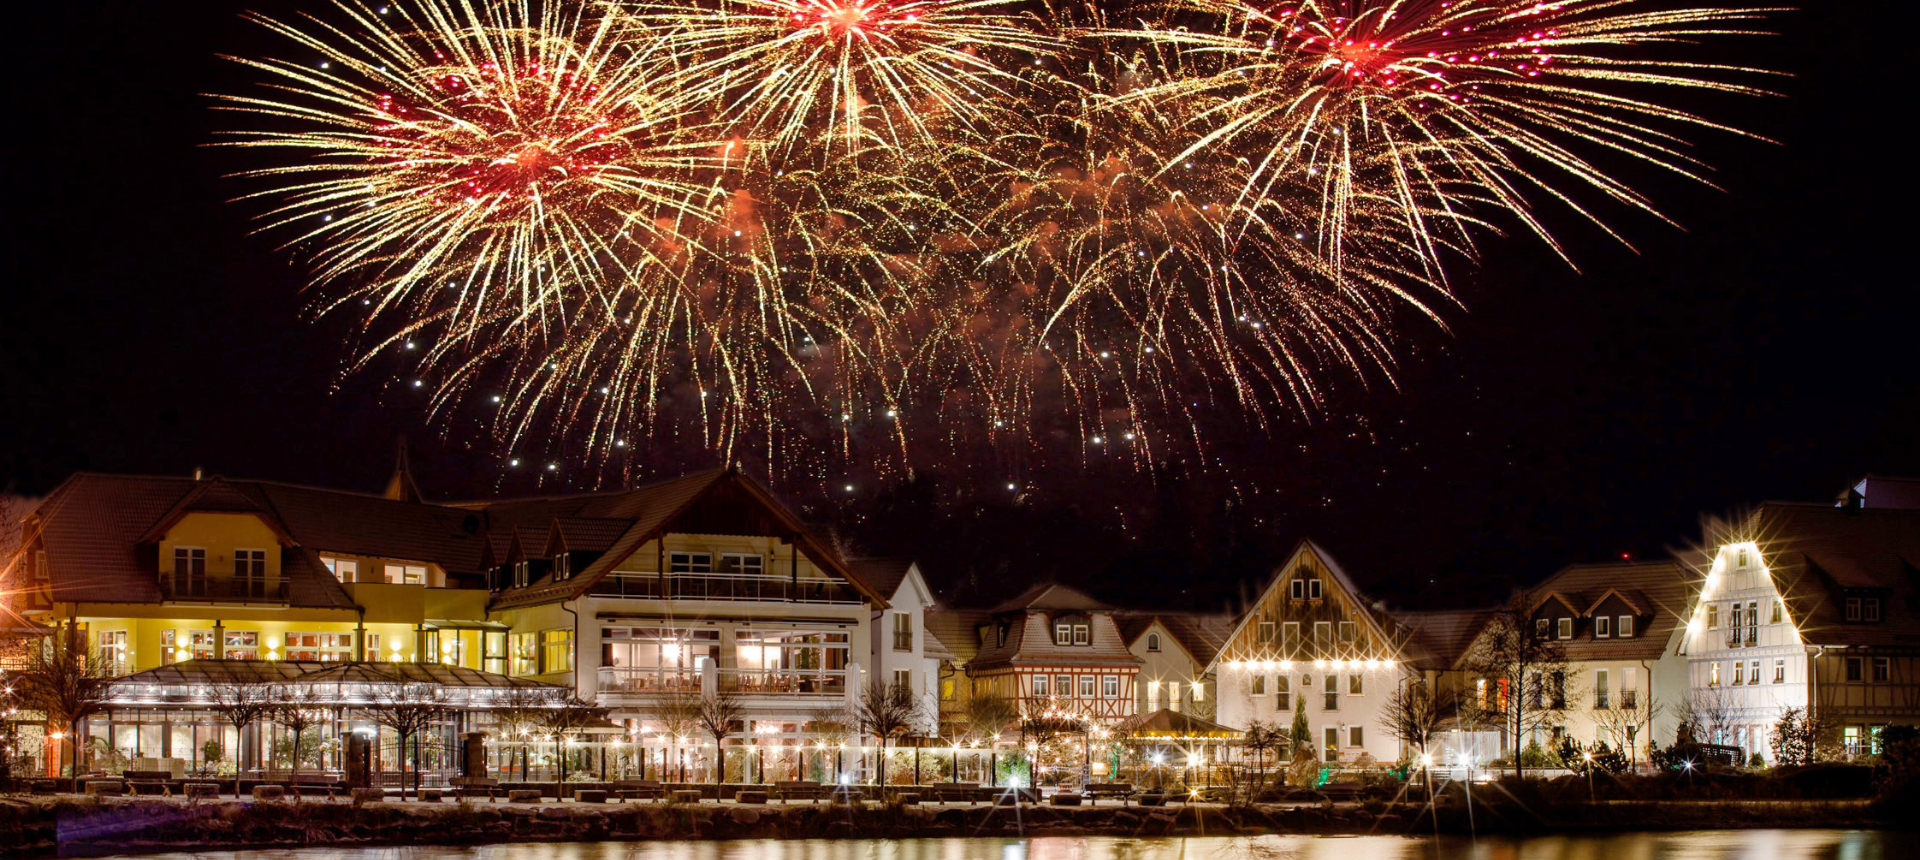 Silvester im Dorf am See